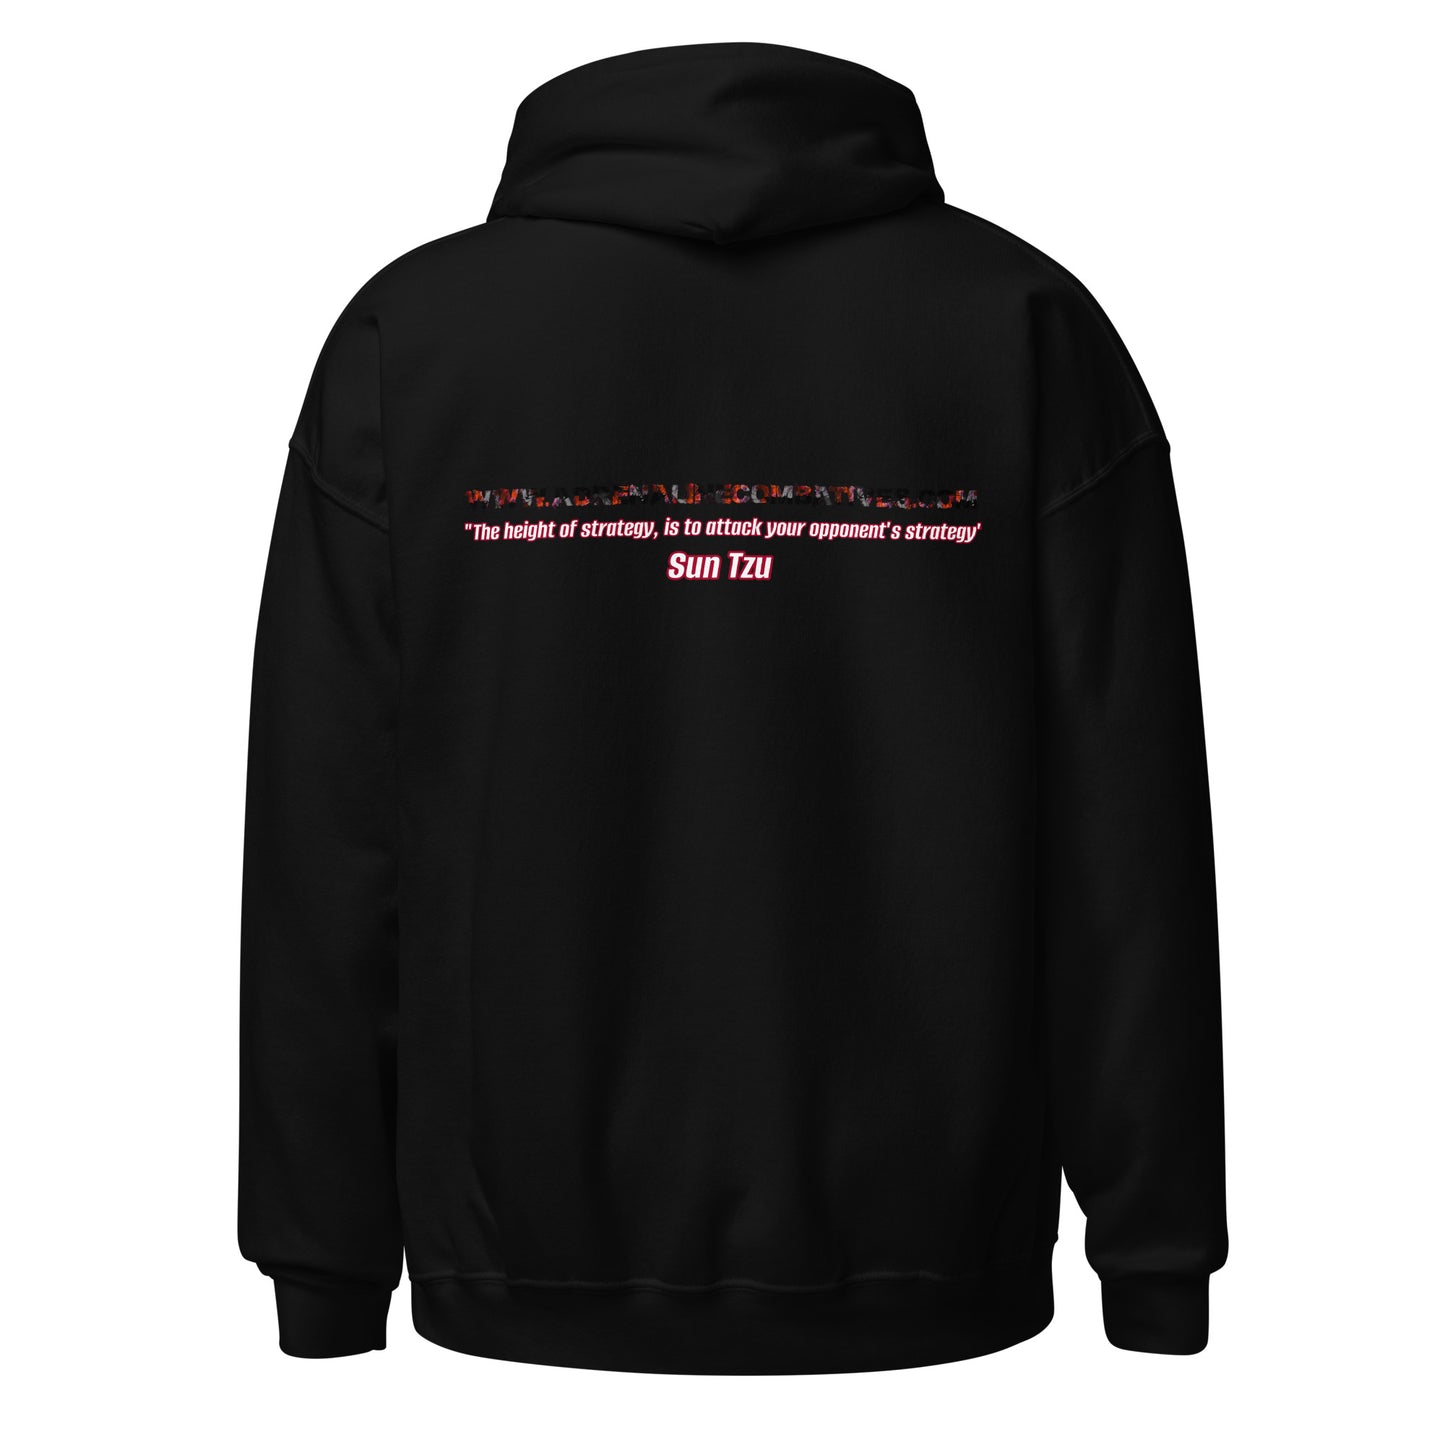 Unisex Hoodie - Adrenaline Combatives - Sun Tzu Quote: "The height of strategy, is to attack your opponent's strategy"